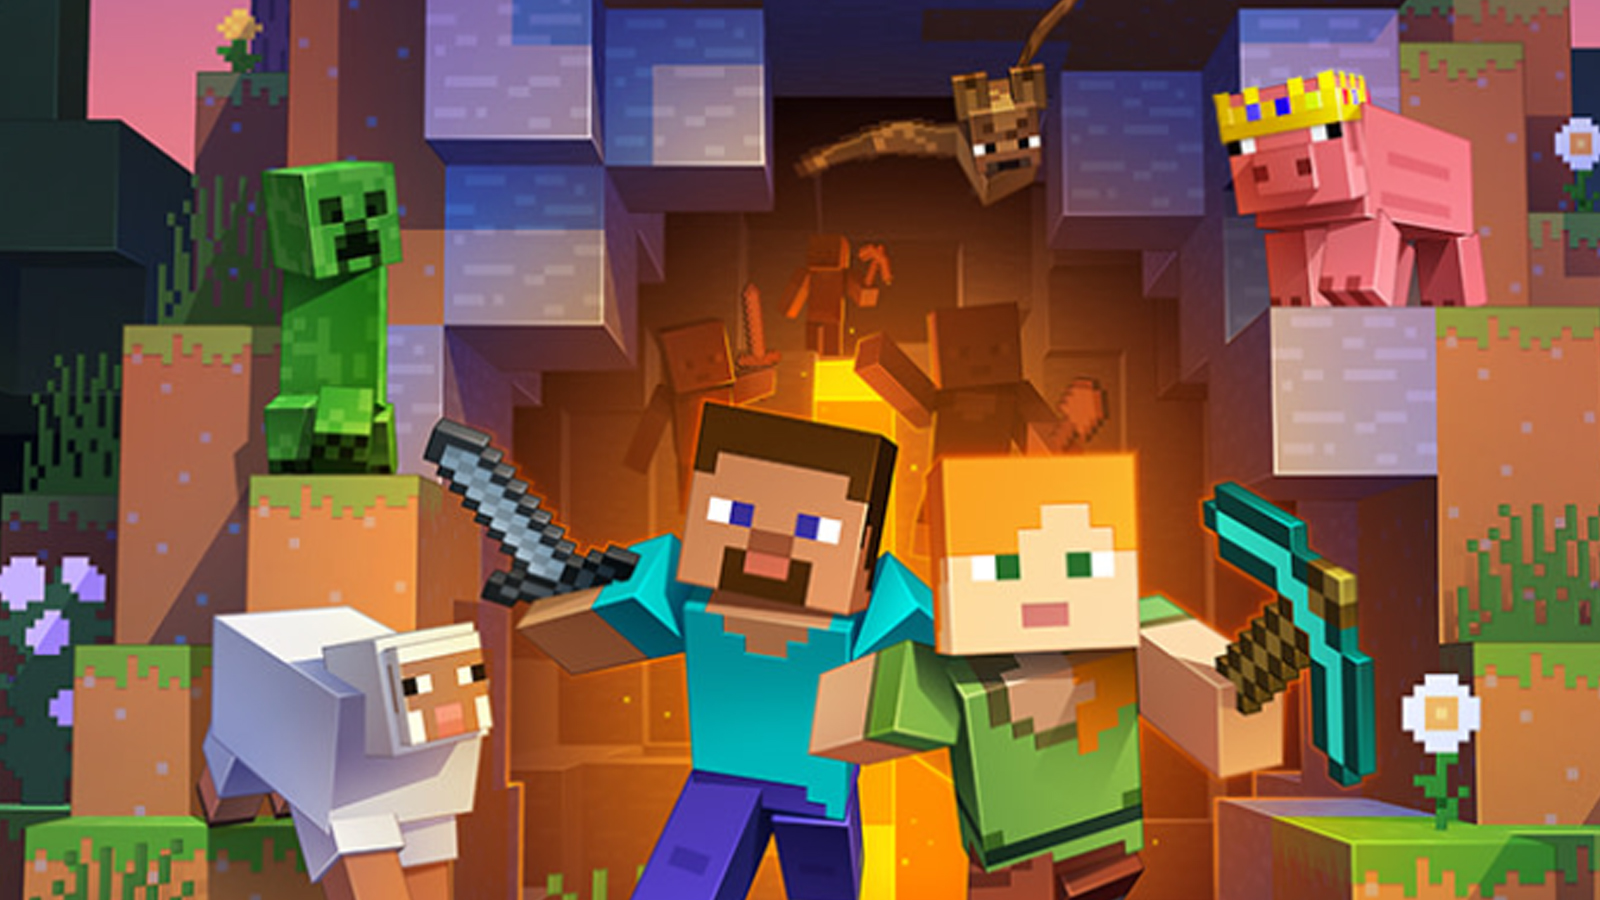 Minecraft TechnoBlade tribute added to game launcher